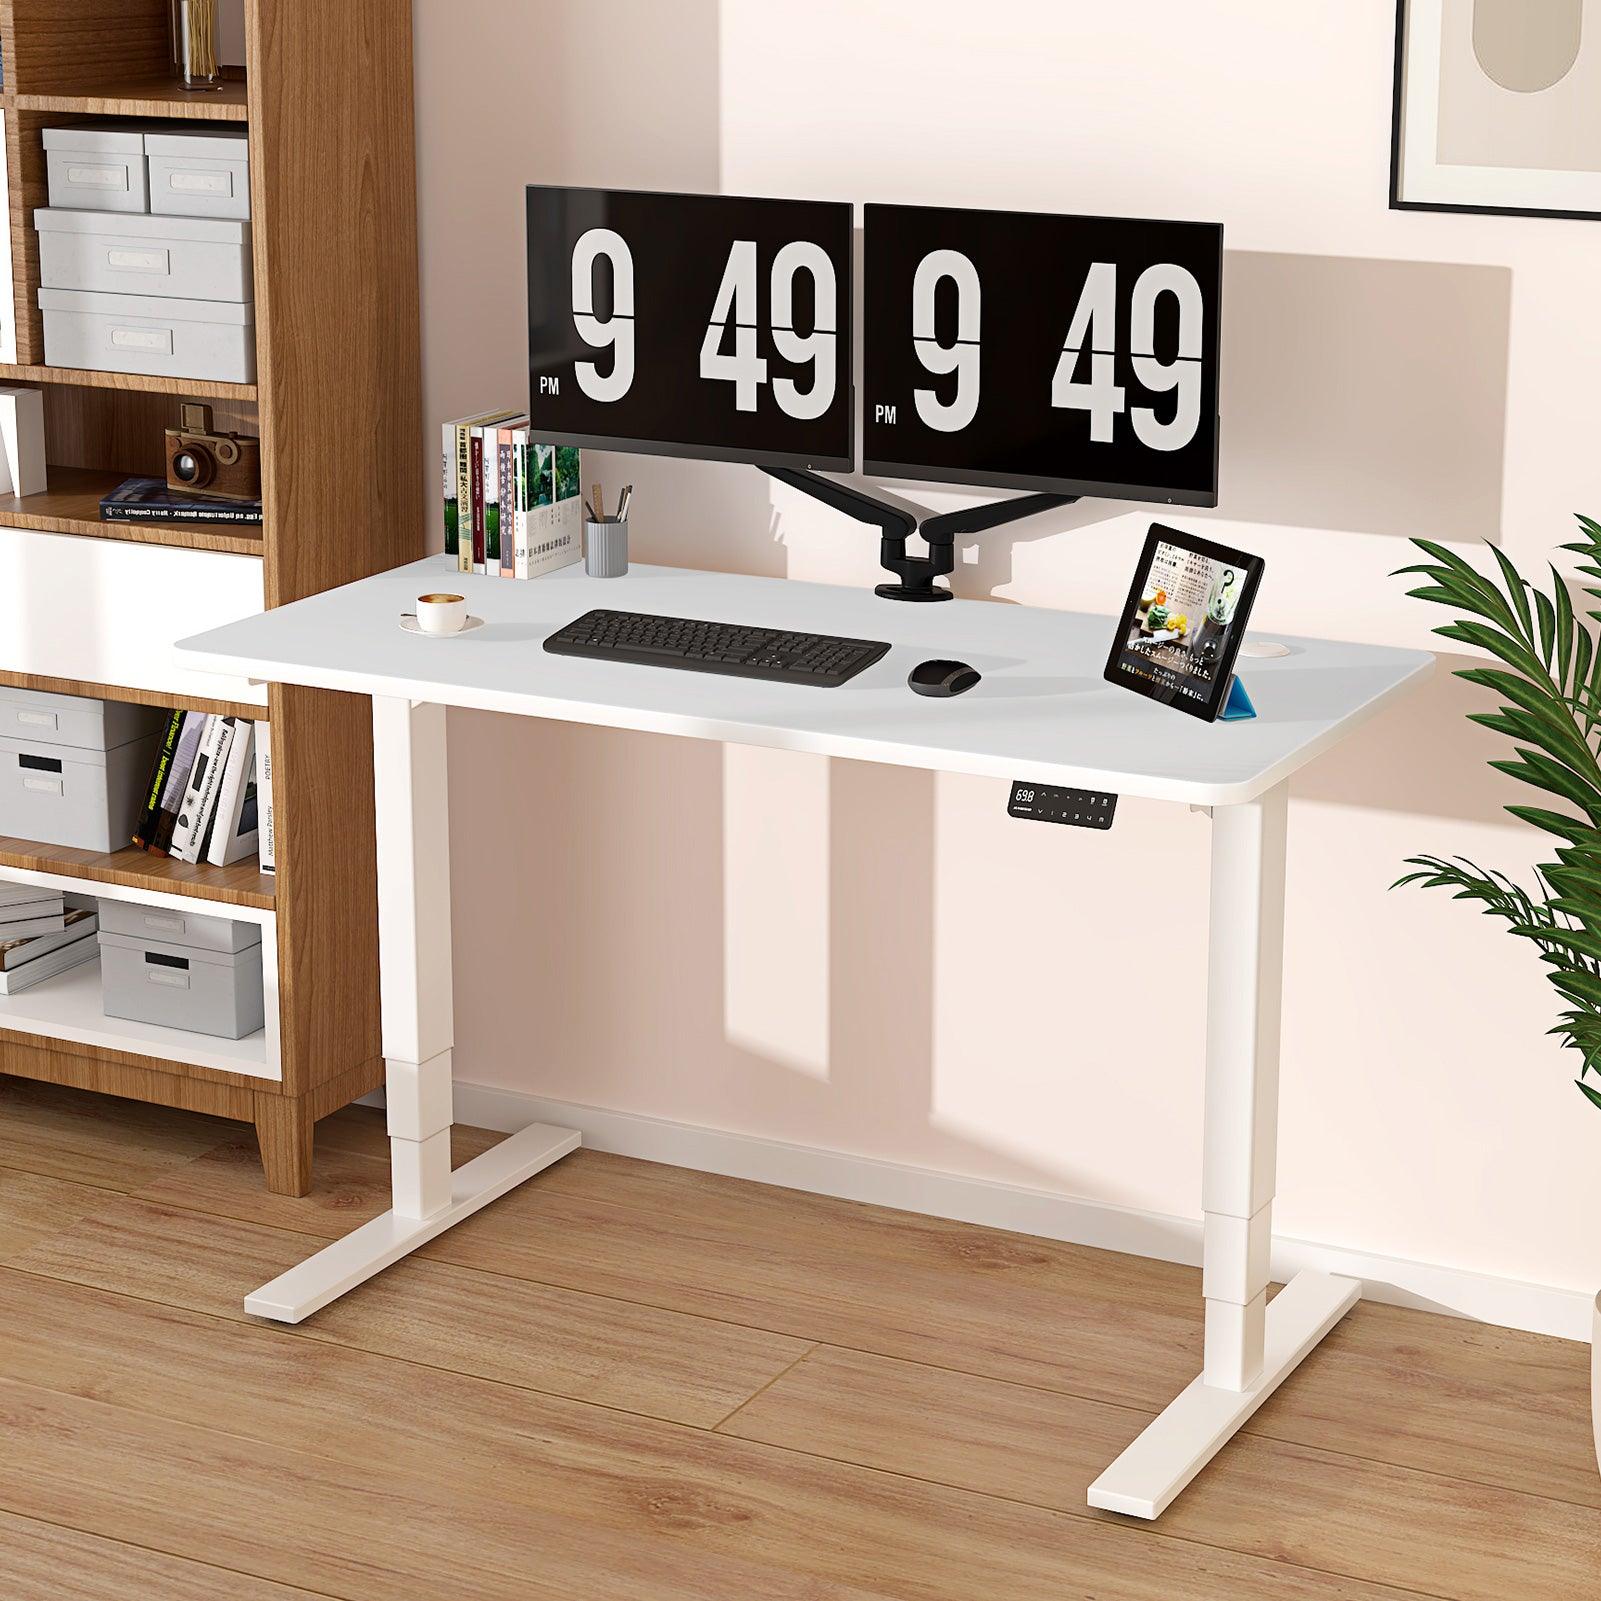 Maidesite T2 Pro Plus - Electric Height Adjustable Standing Desk white Frame white top for work from home people